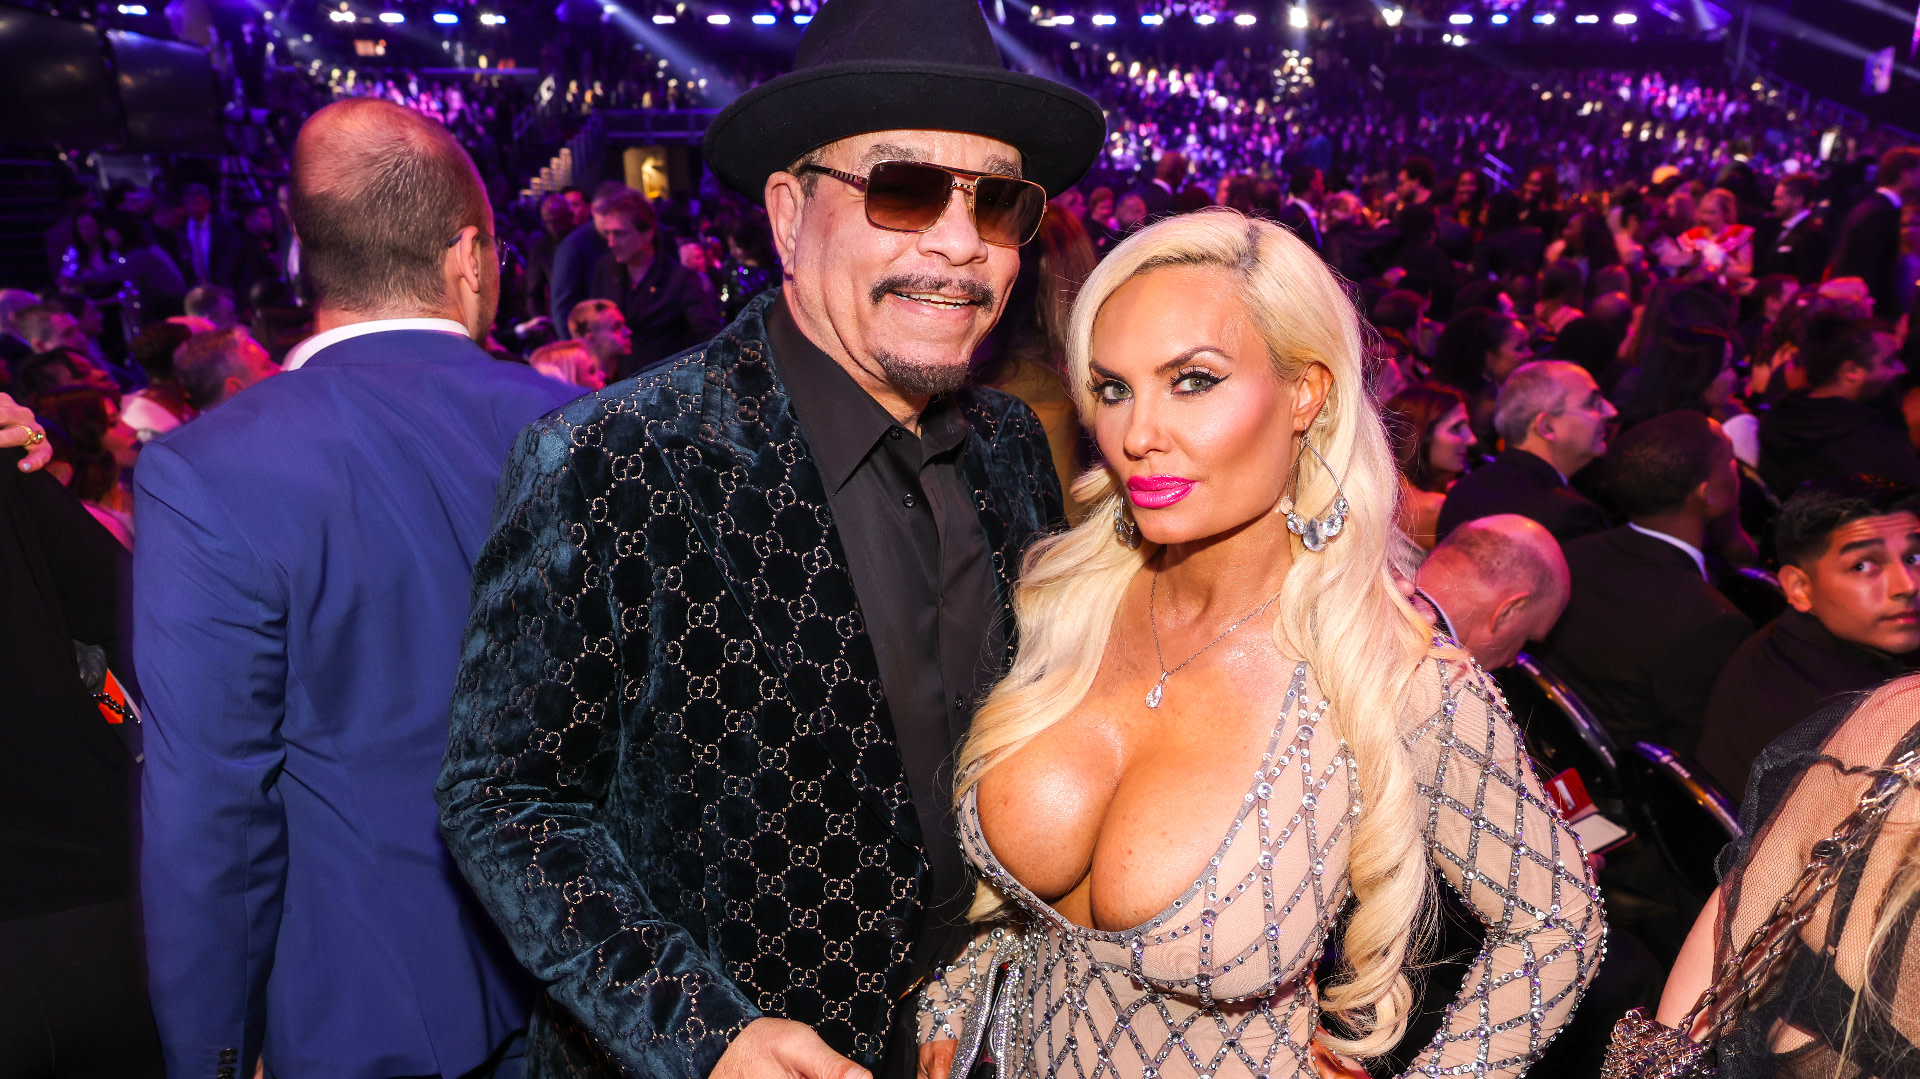 Ice T exudes sexiness with his daring Grammy outfit